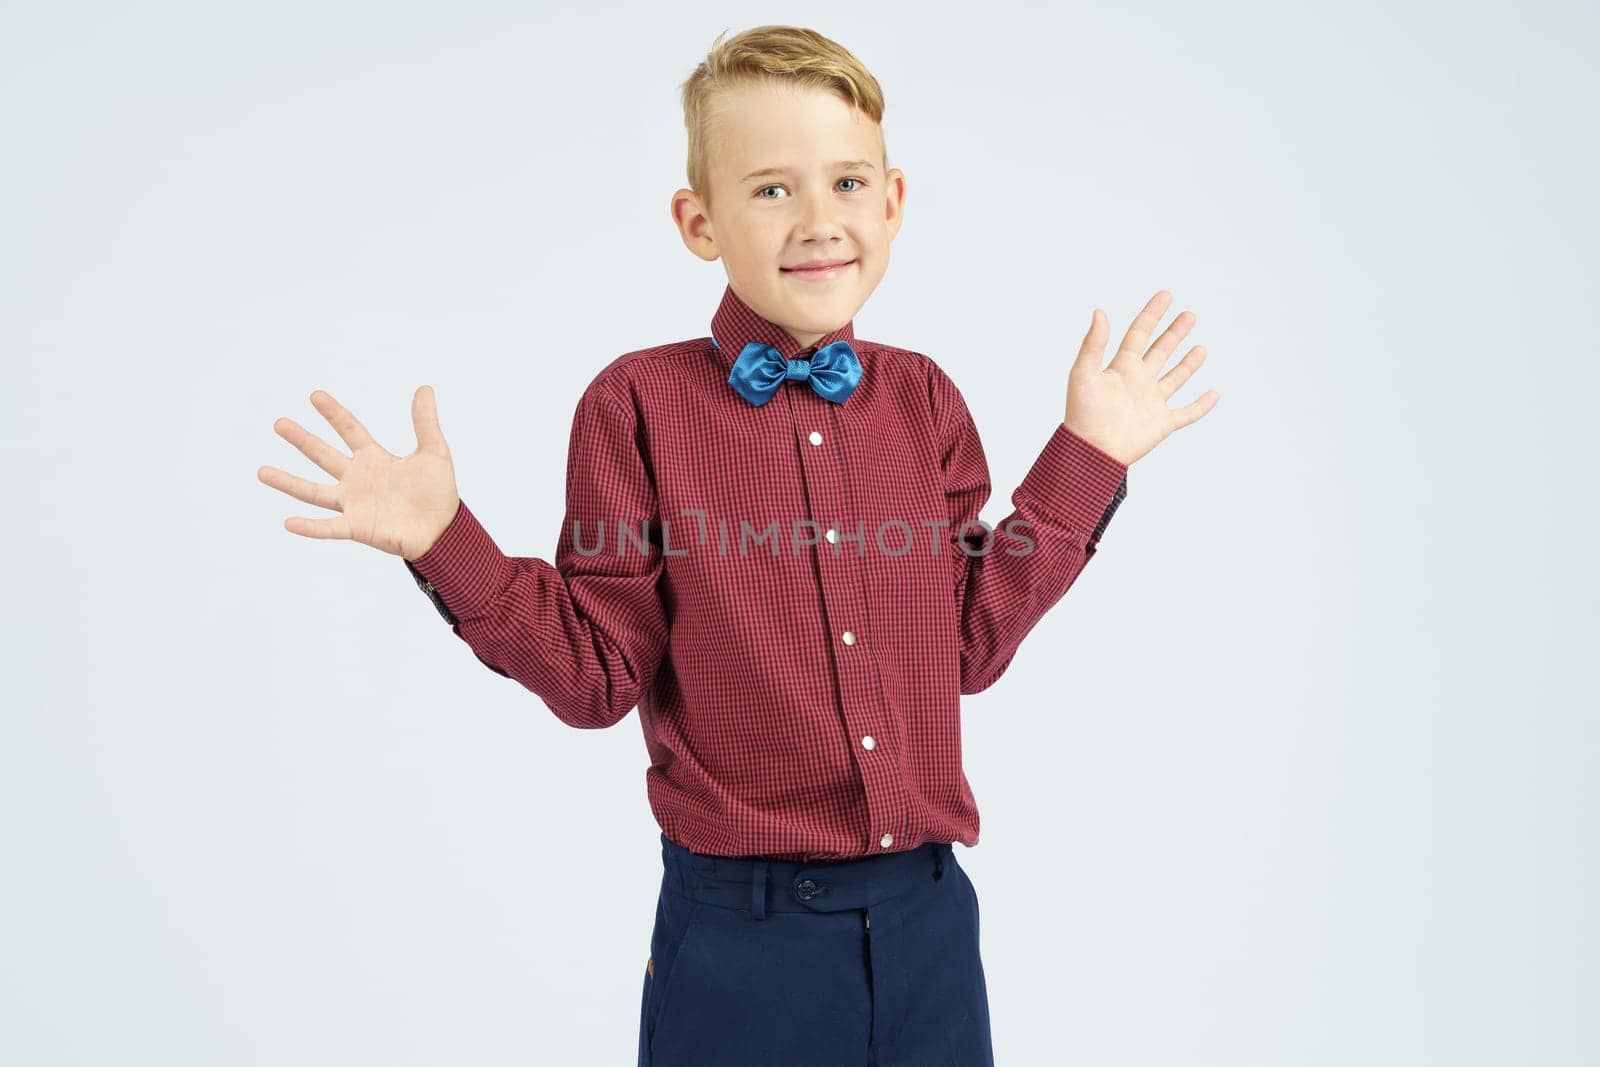 A portrait of a schoolboy who raised his hands in surprise and joy. Isolated background. by Sd28DimoN_1976